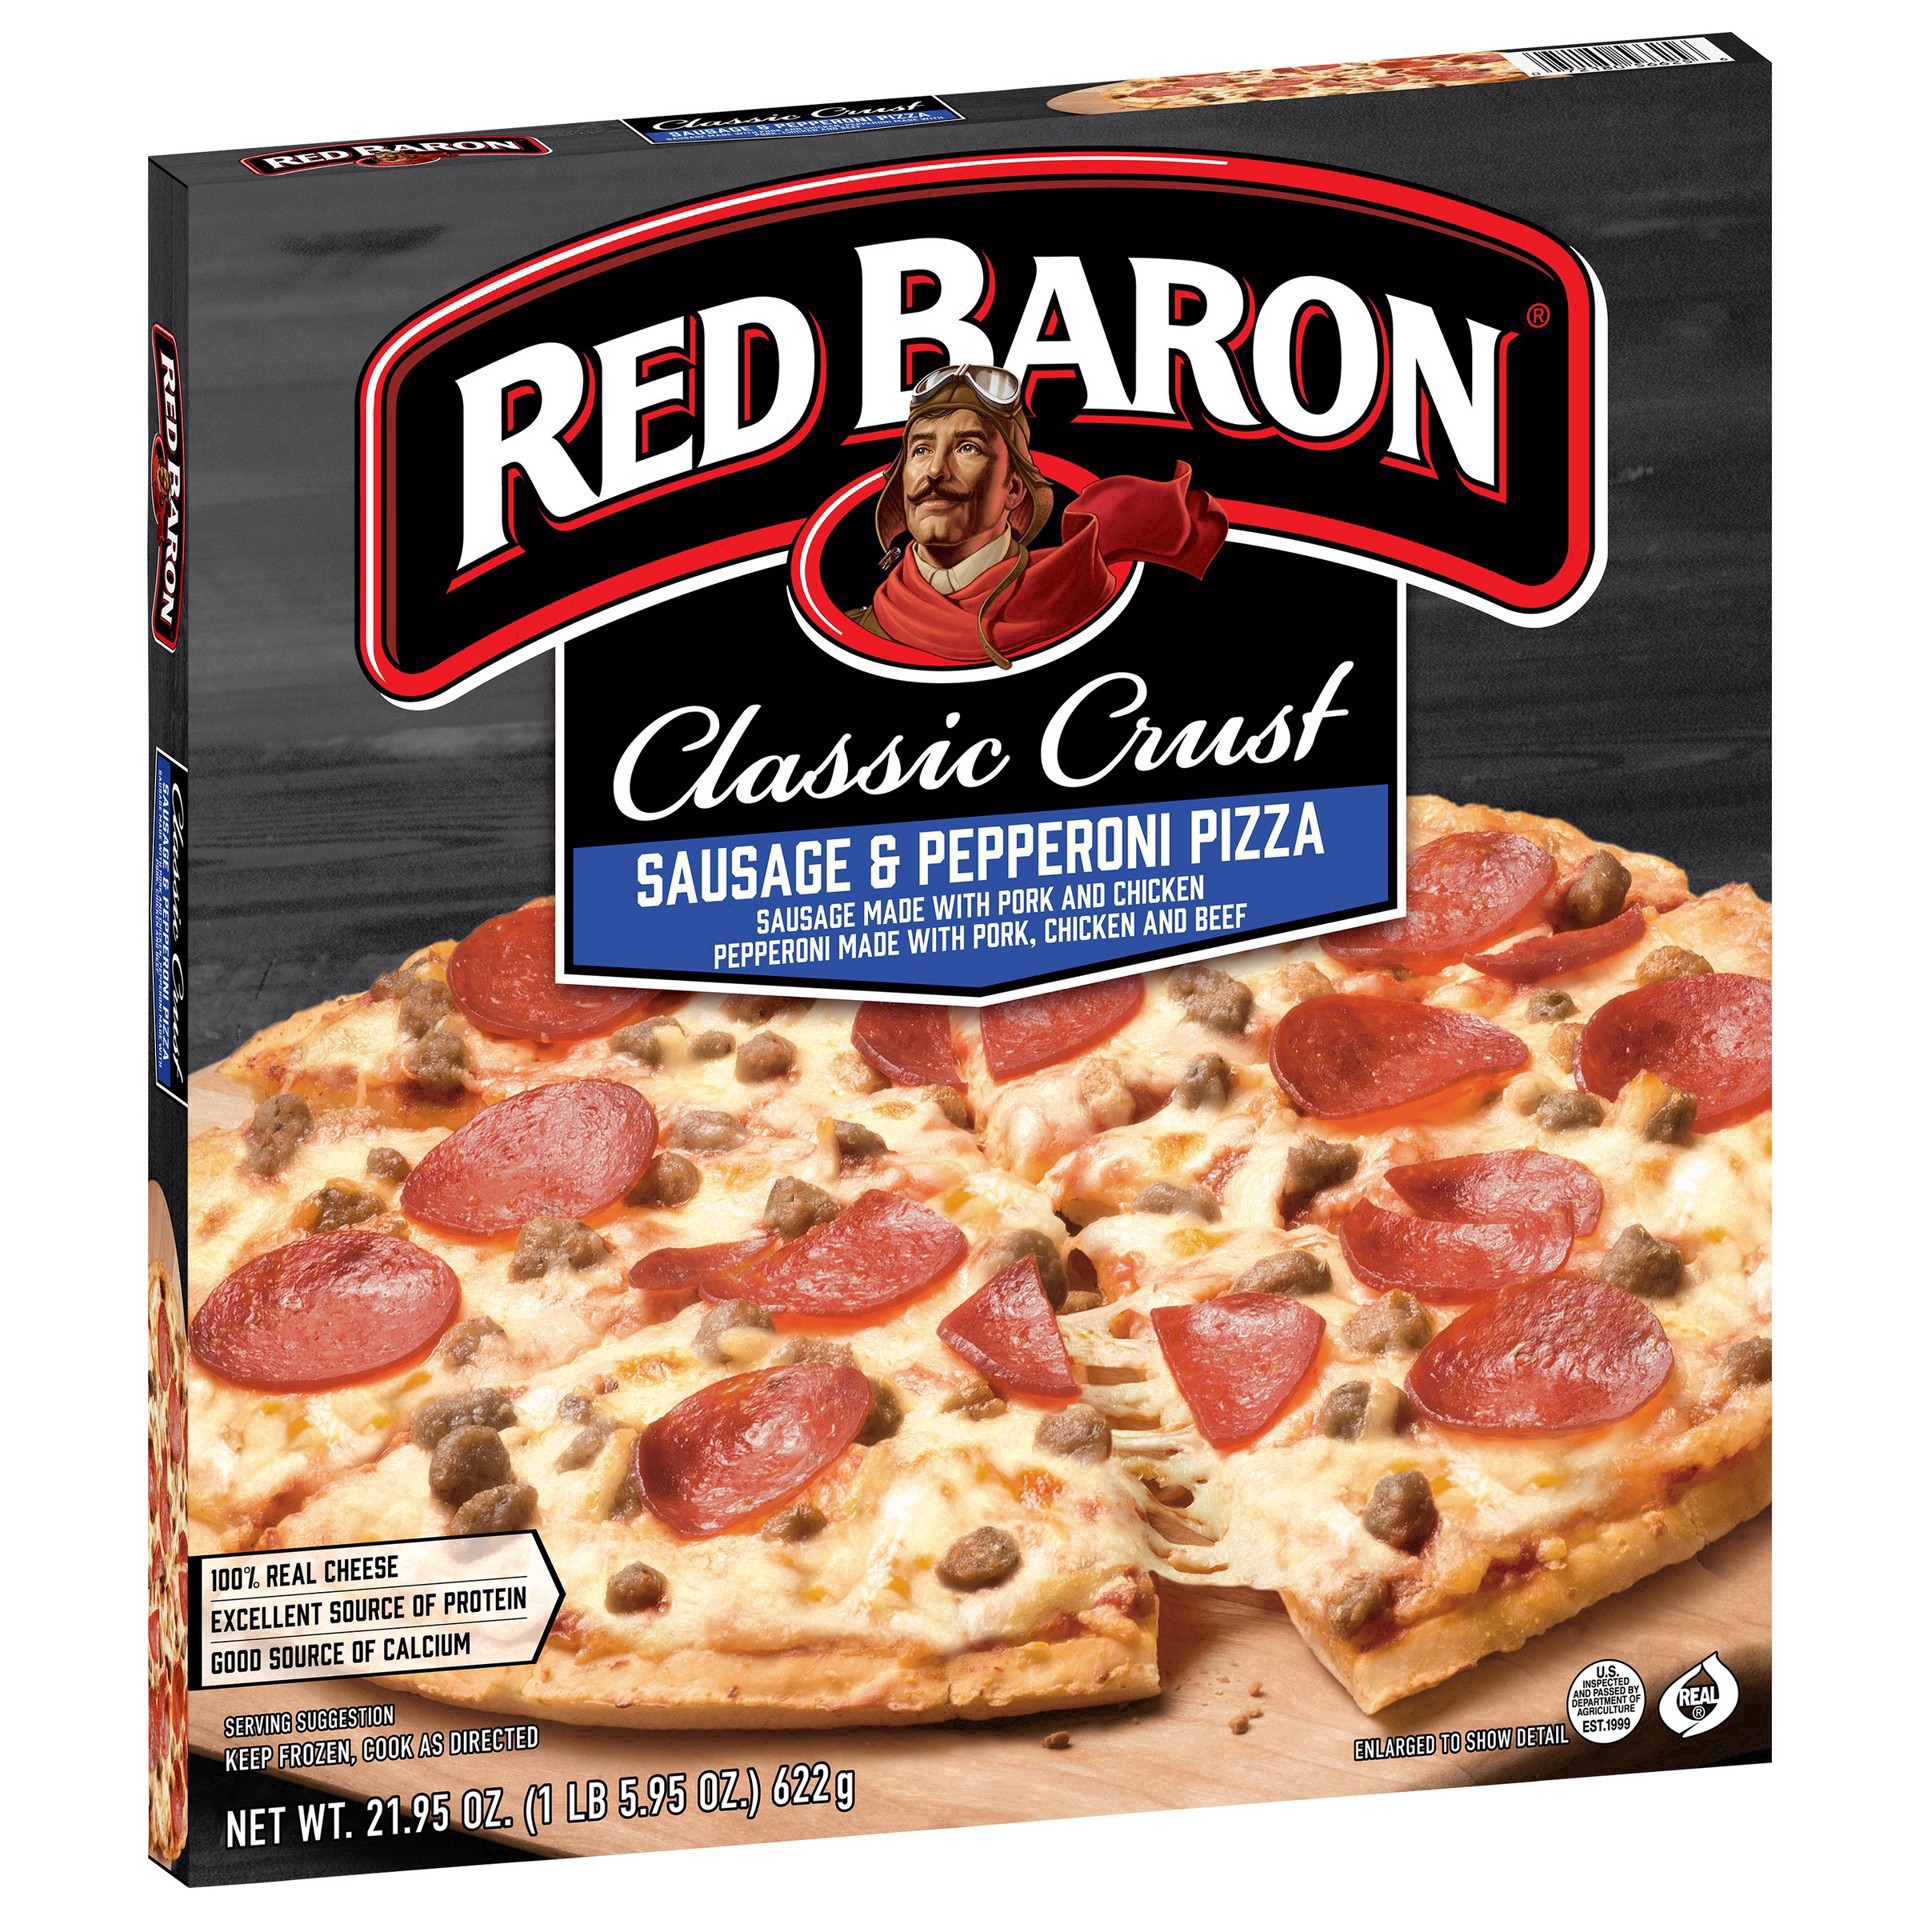 slide 24 of 49, Red Baron Frozen Pizza Classic Crust Sausage & Pepperoni, 21.95 oz